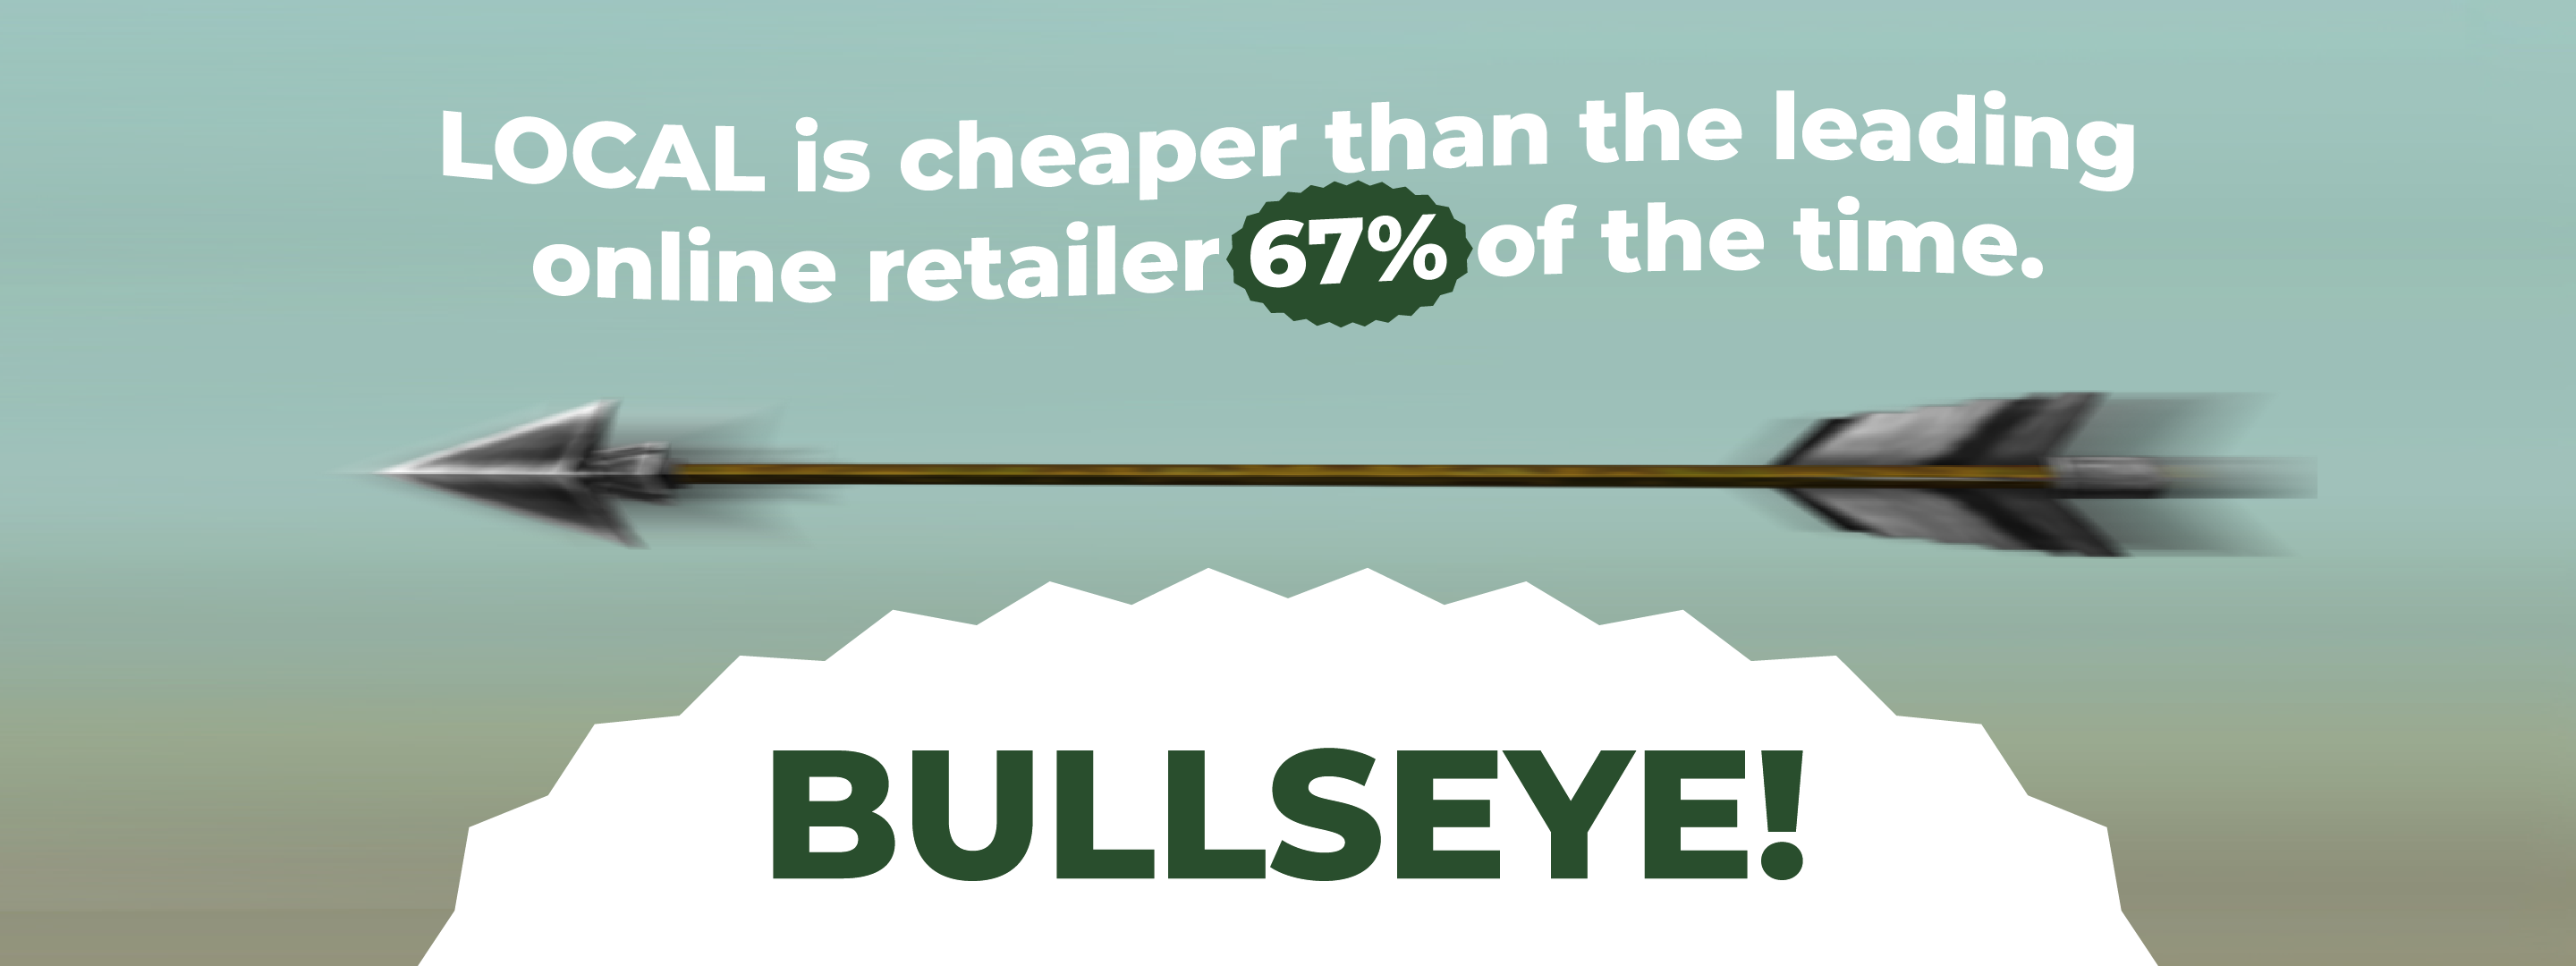 Local is cheaper than the leading online retailer 67% of the time.